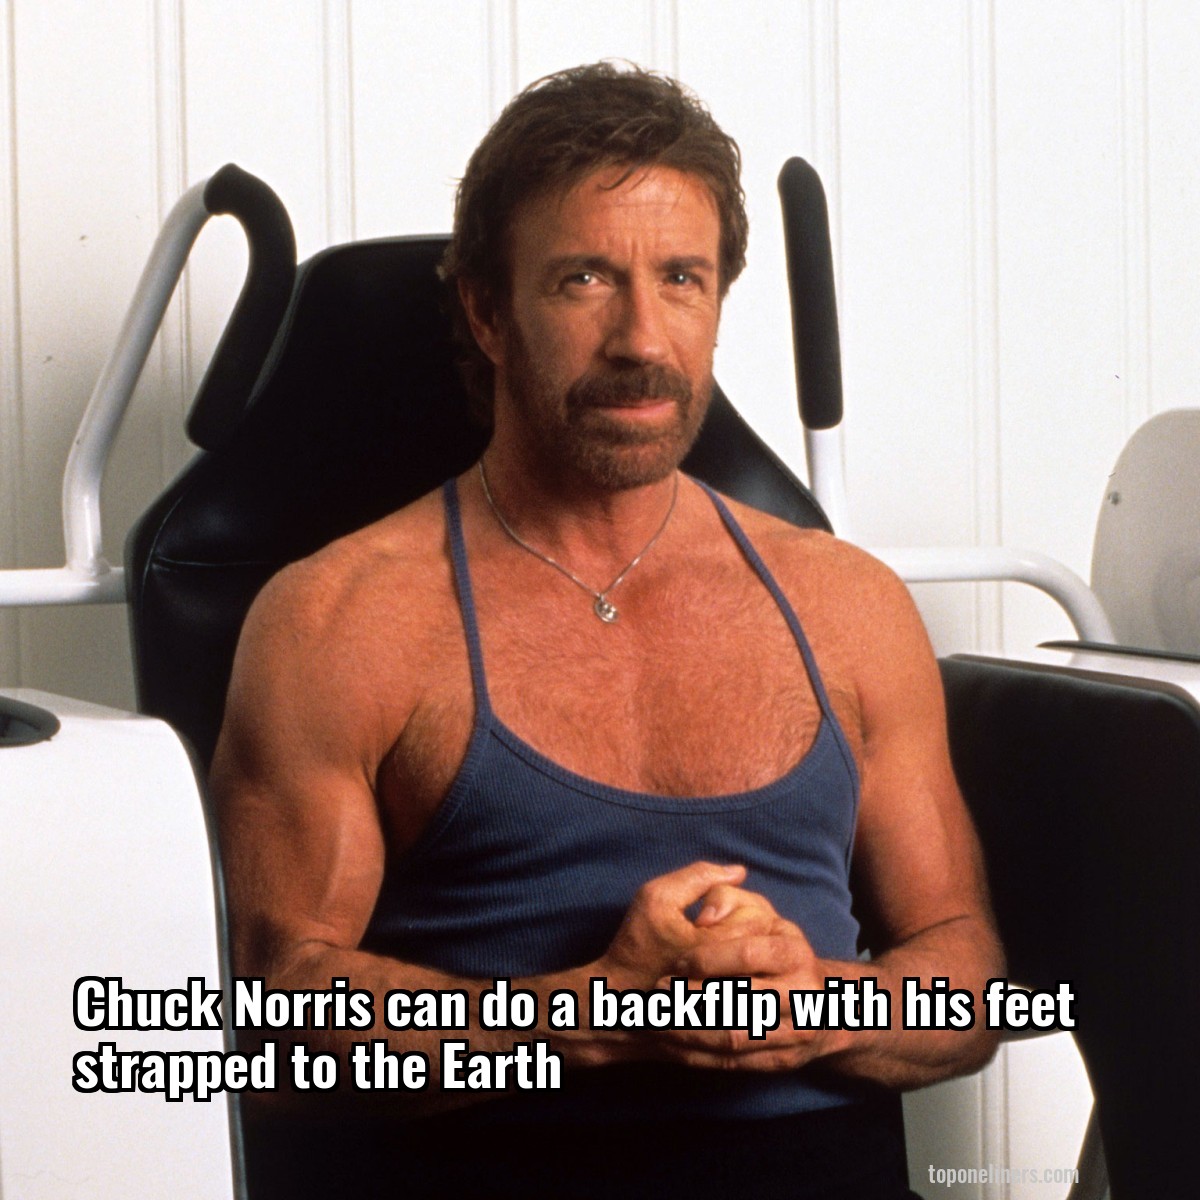 Chuck Norris can do a backflip with his feet strapped to the Earth